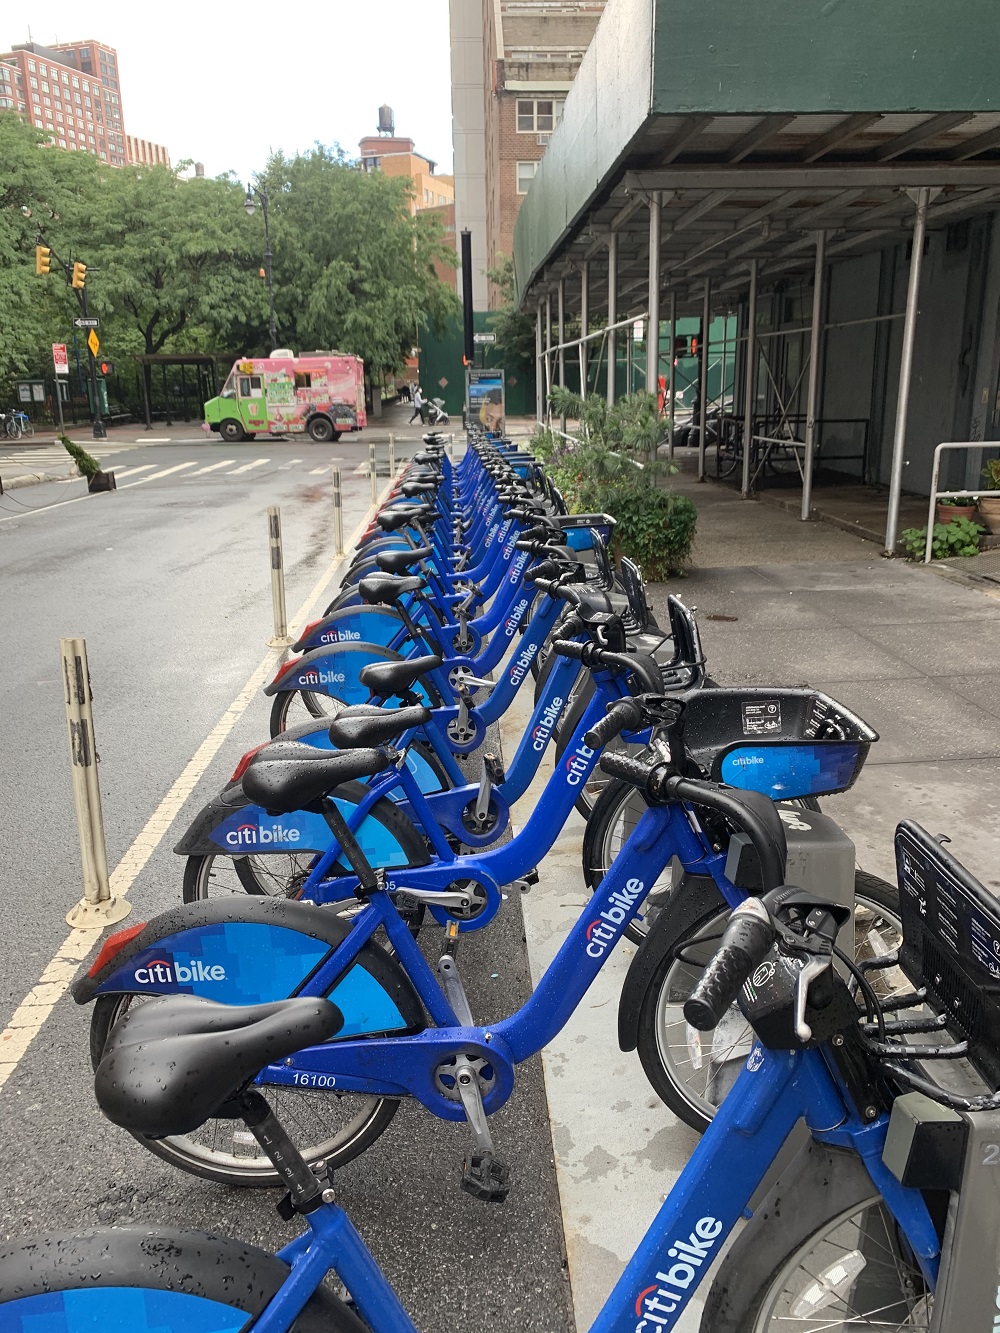 Citi Bike on Duane continues to cause troubles for businesses